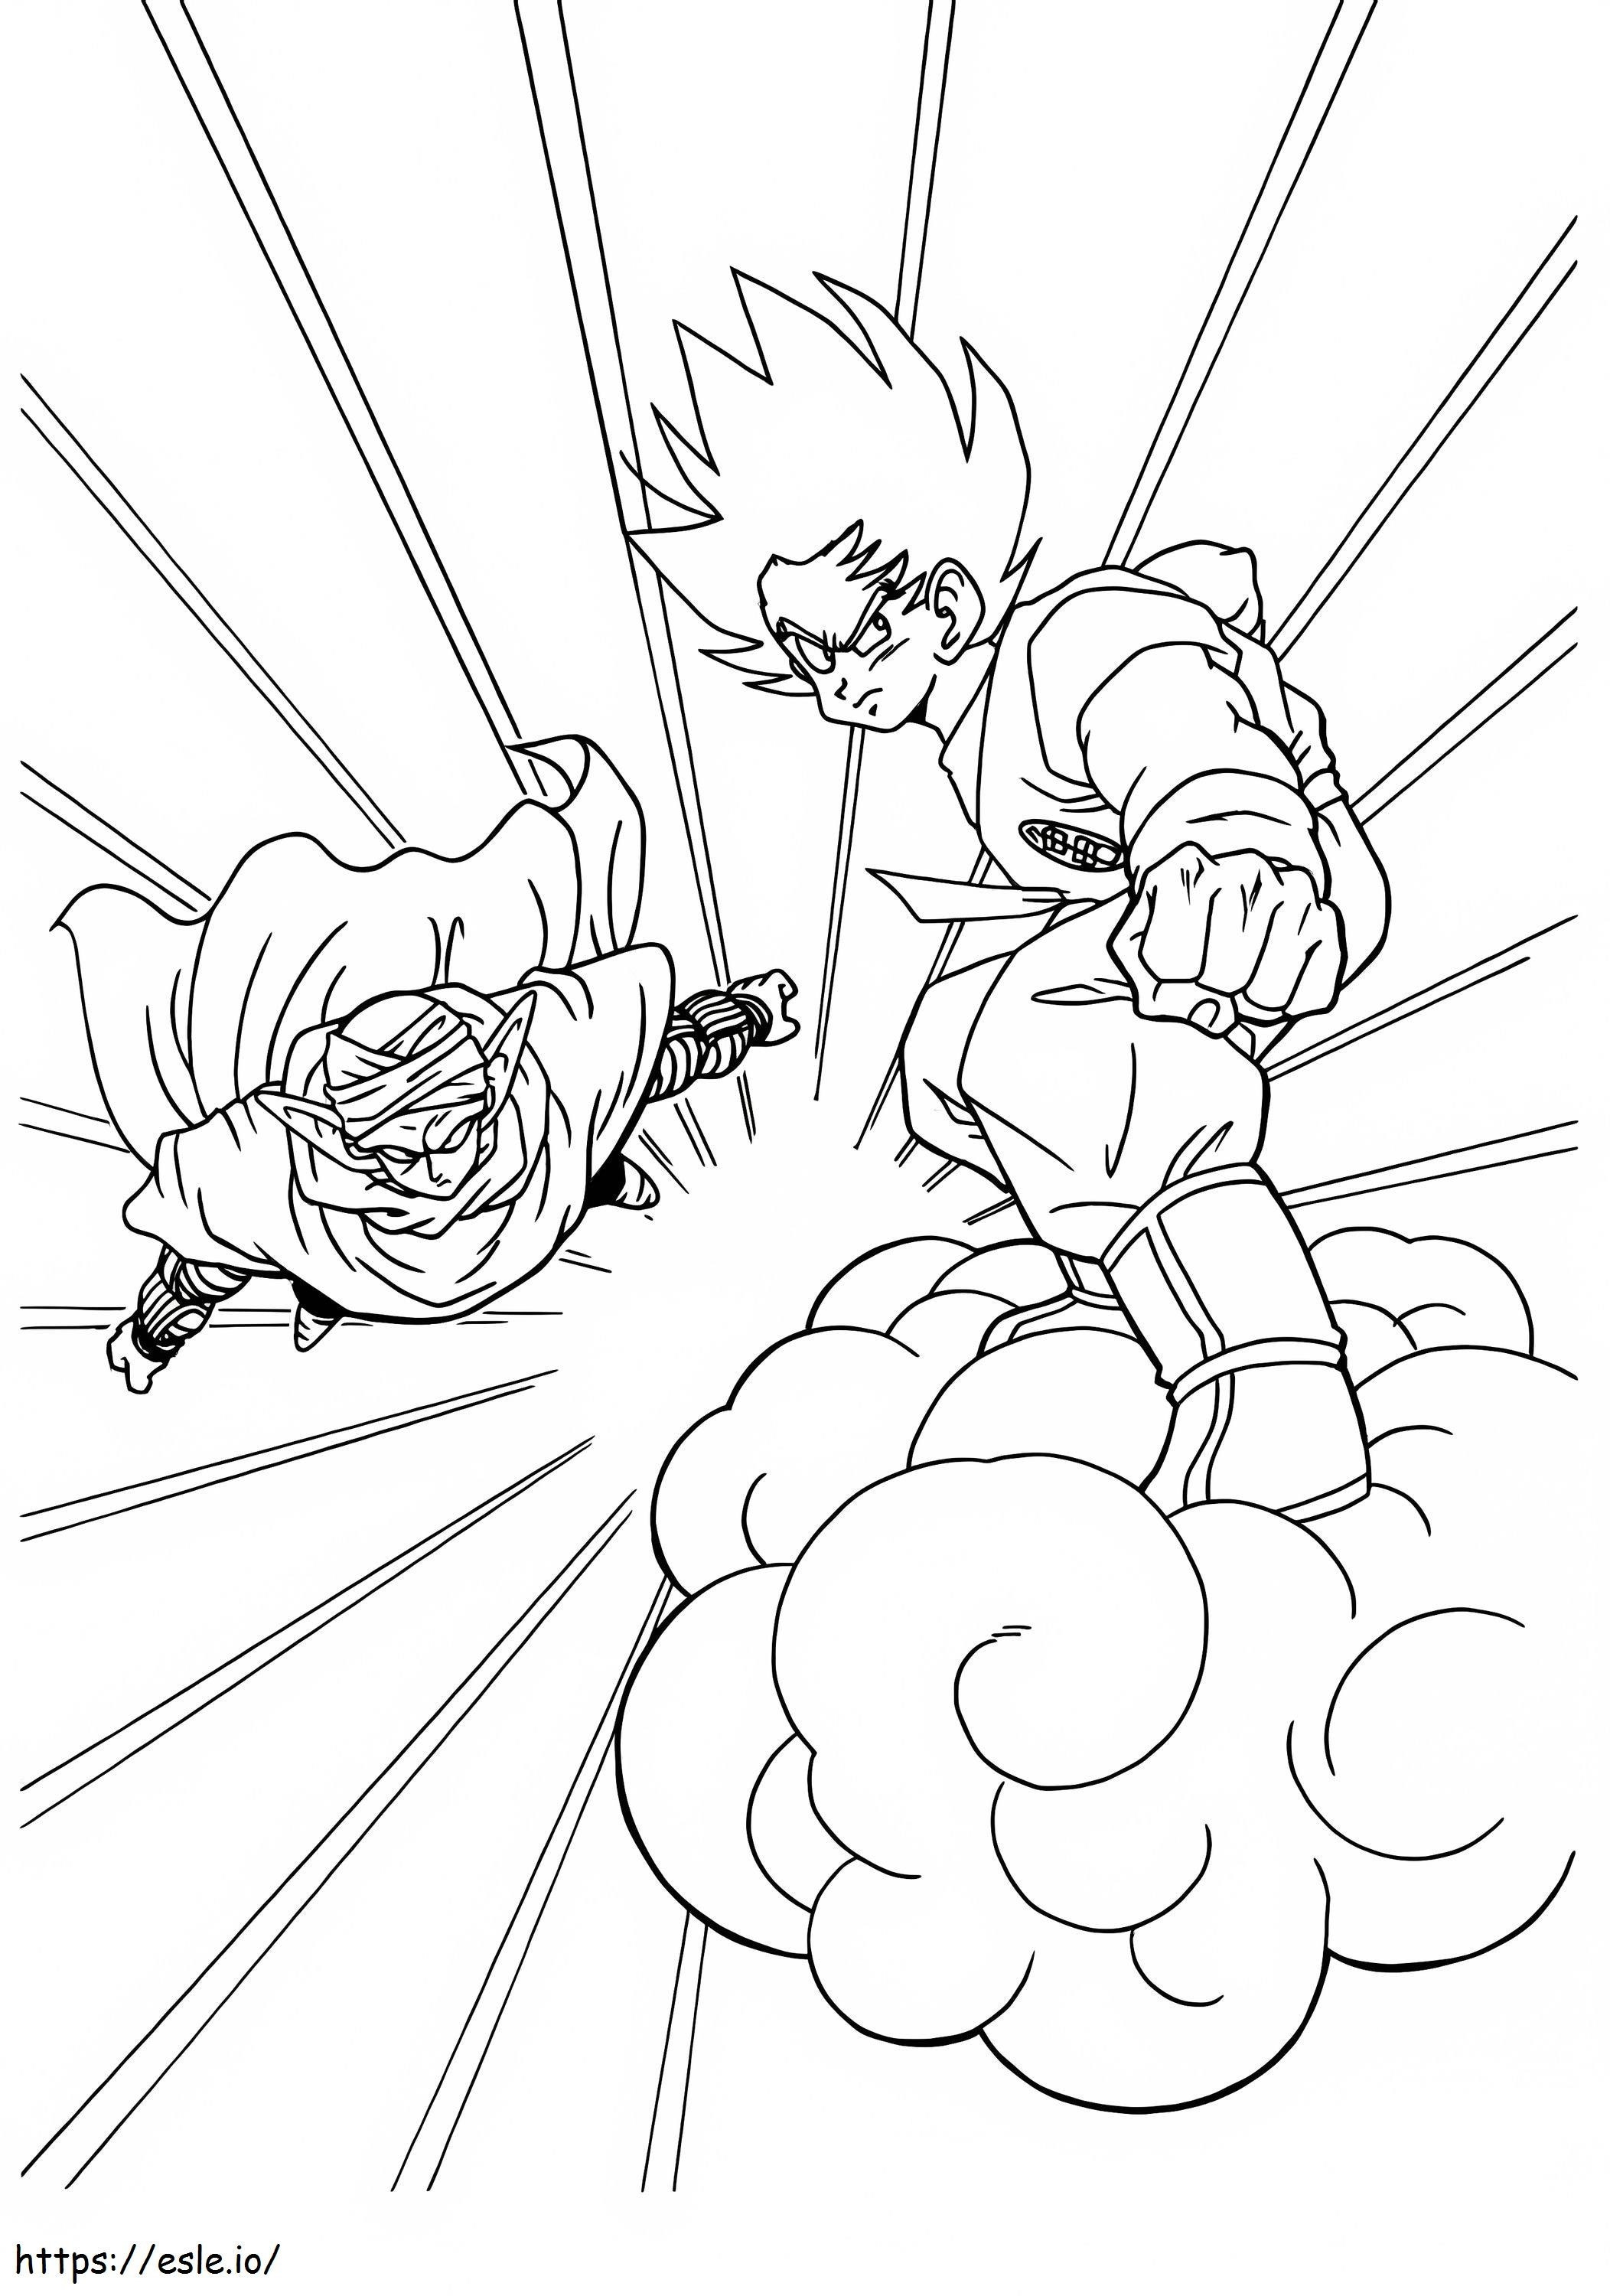 Son Goku And Piccolo coloring page